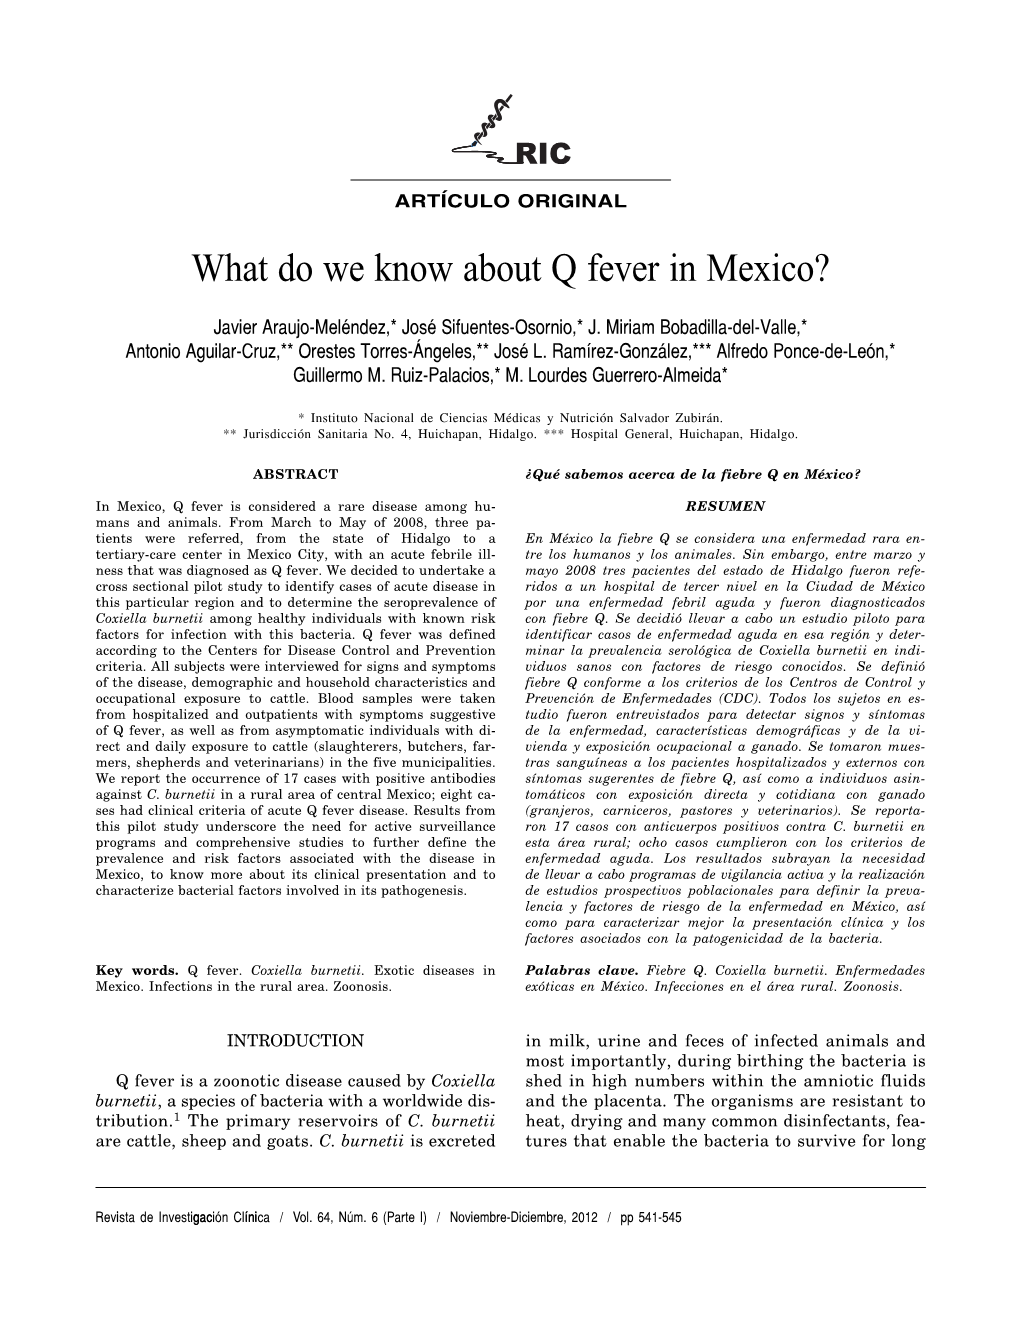 What Do We Know About Q Fever in Mexico?